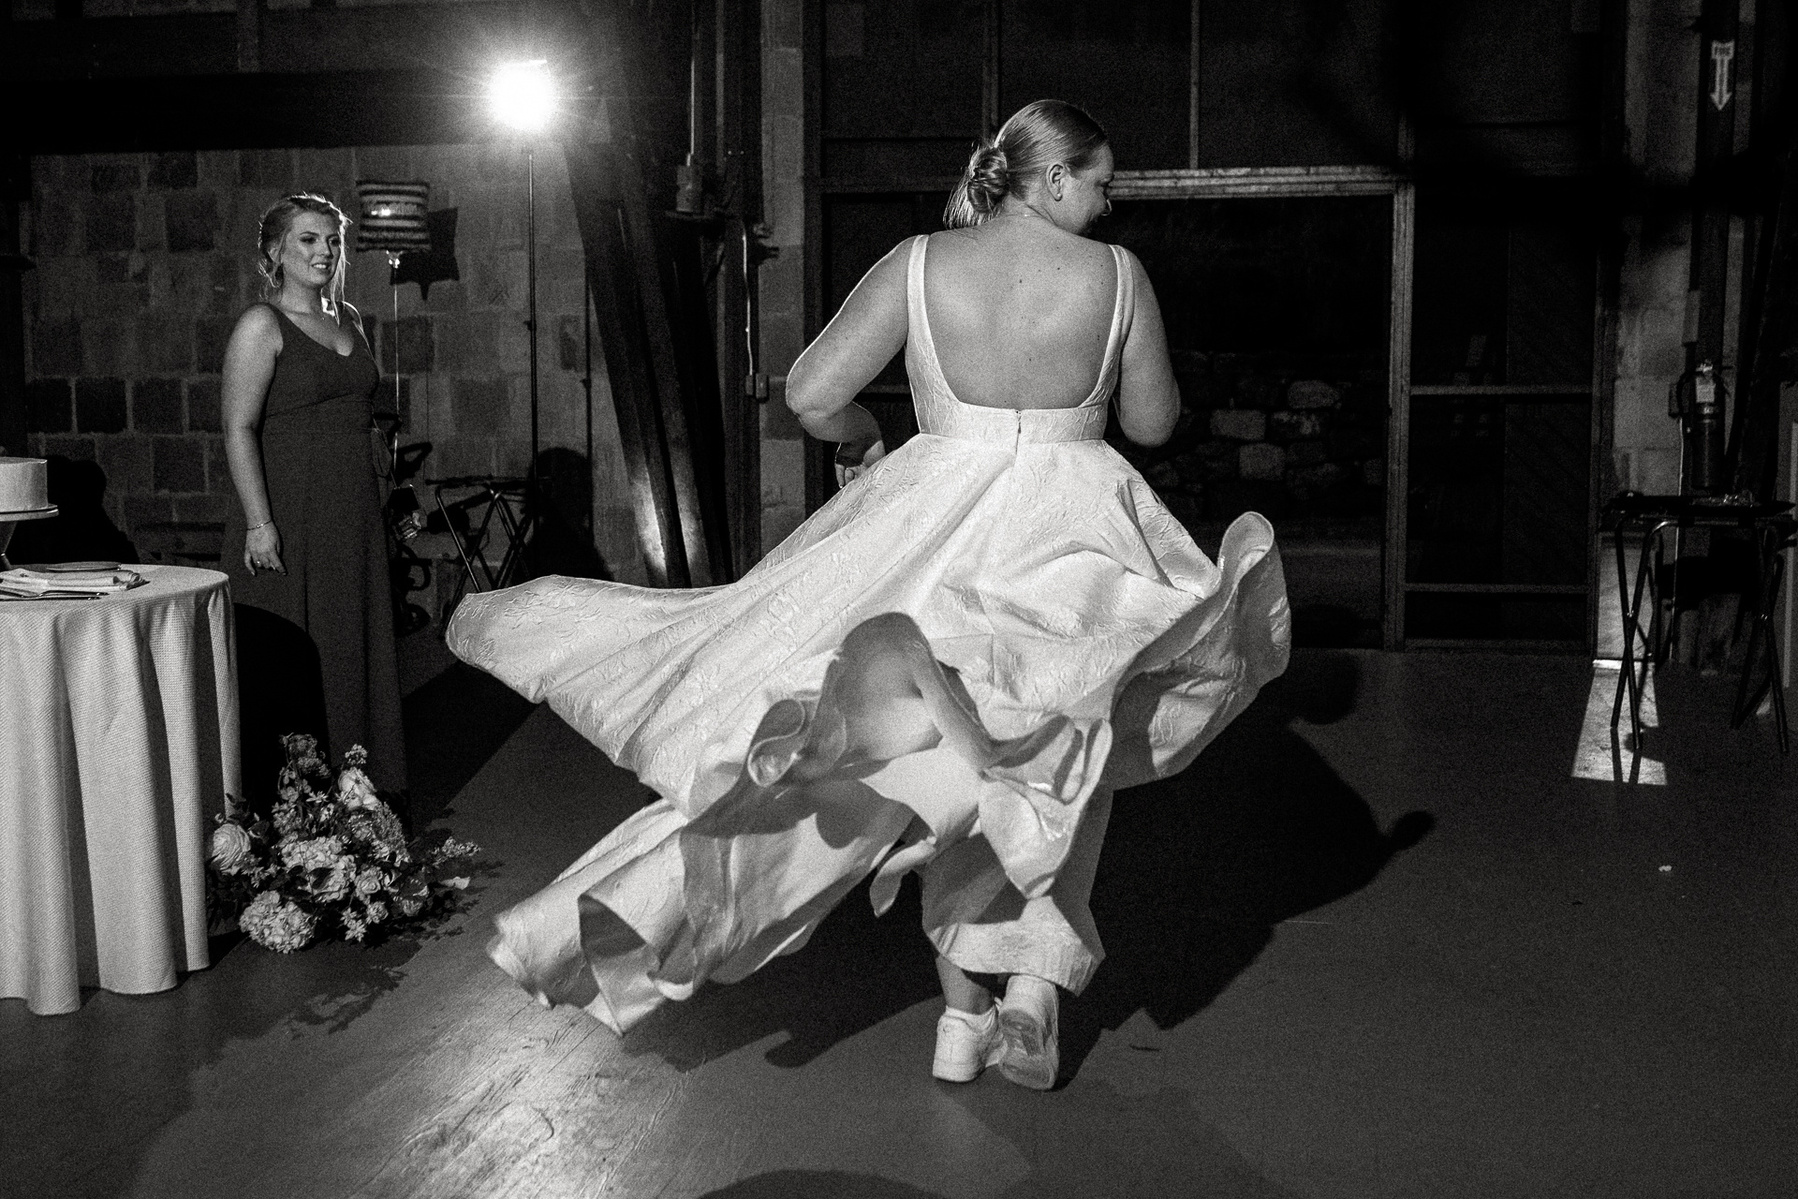 As a bride twirls her dress flies out behind her in waves of white fabric at her Ipswich MA wedding